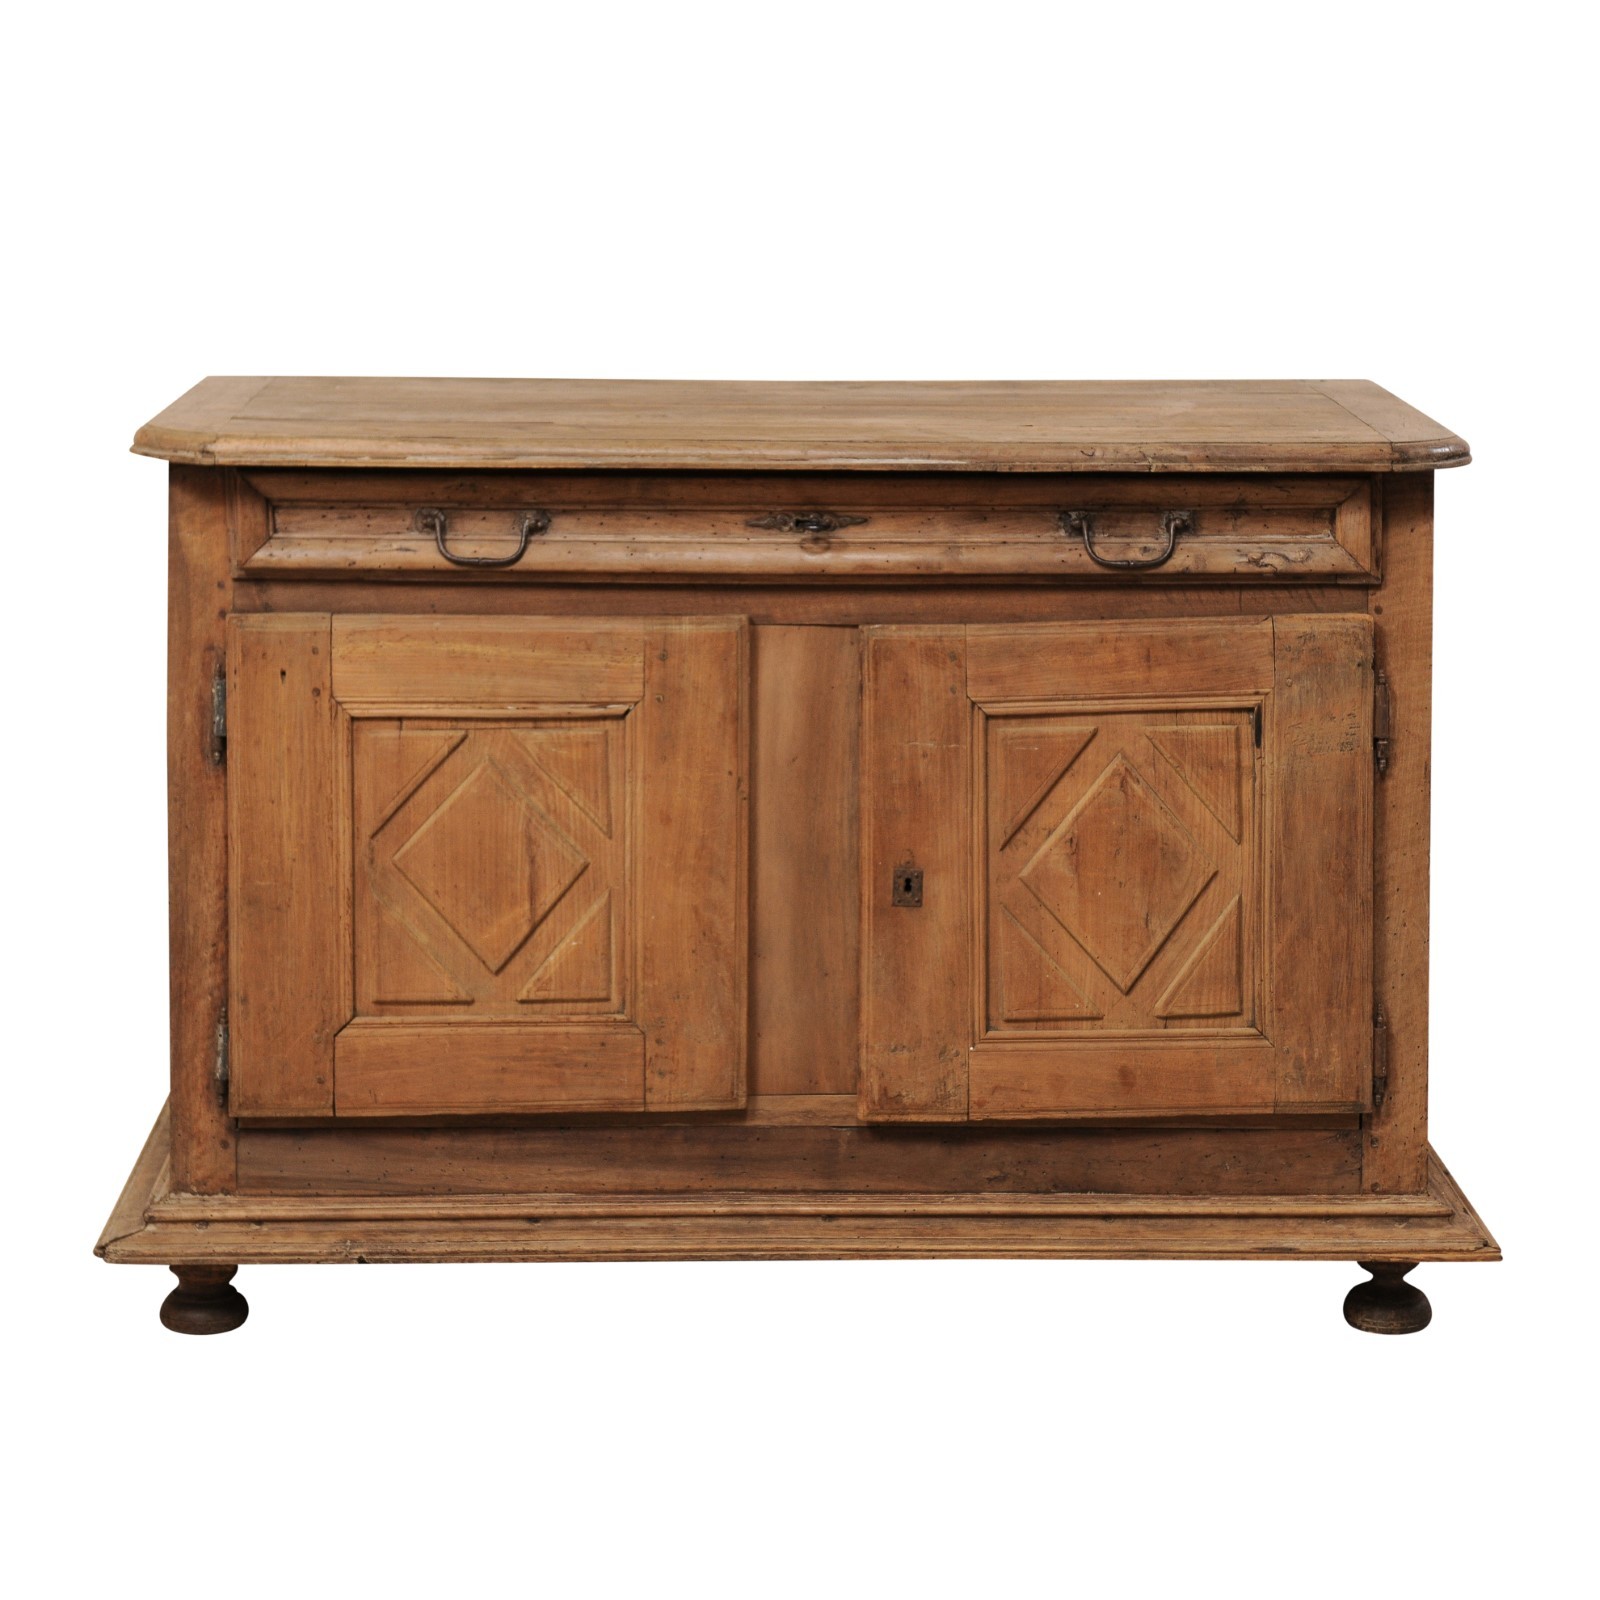 18th C. Walnut Buffet Chest from Italy